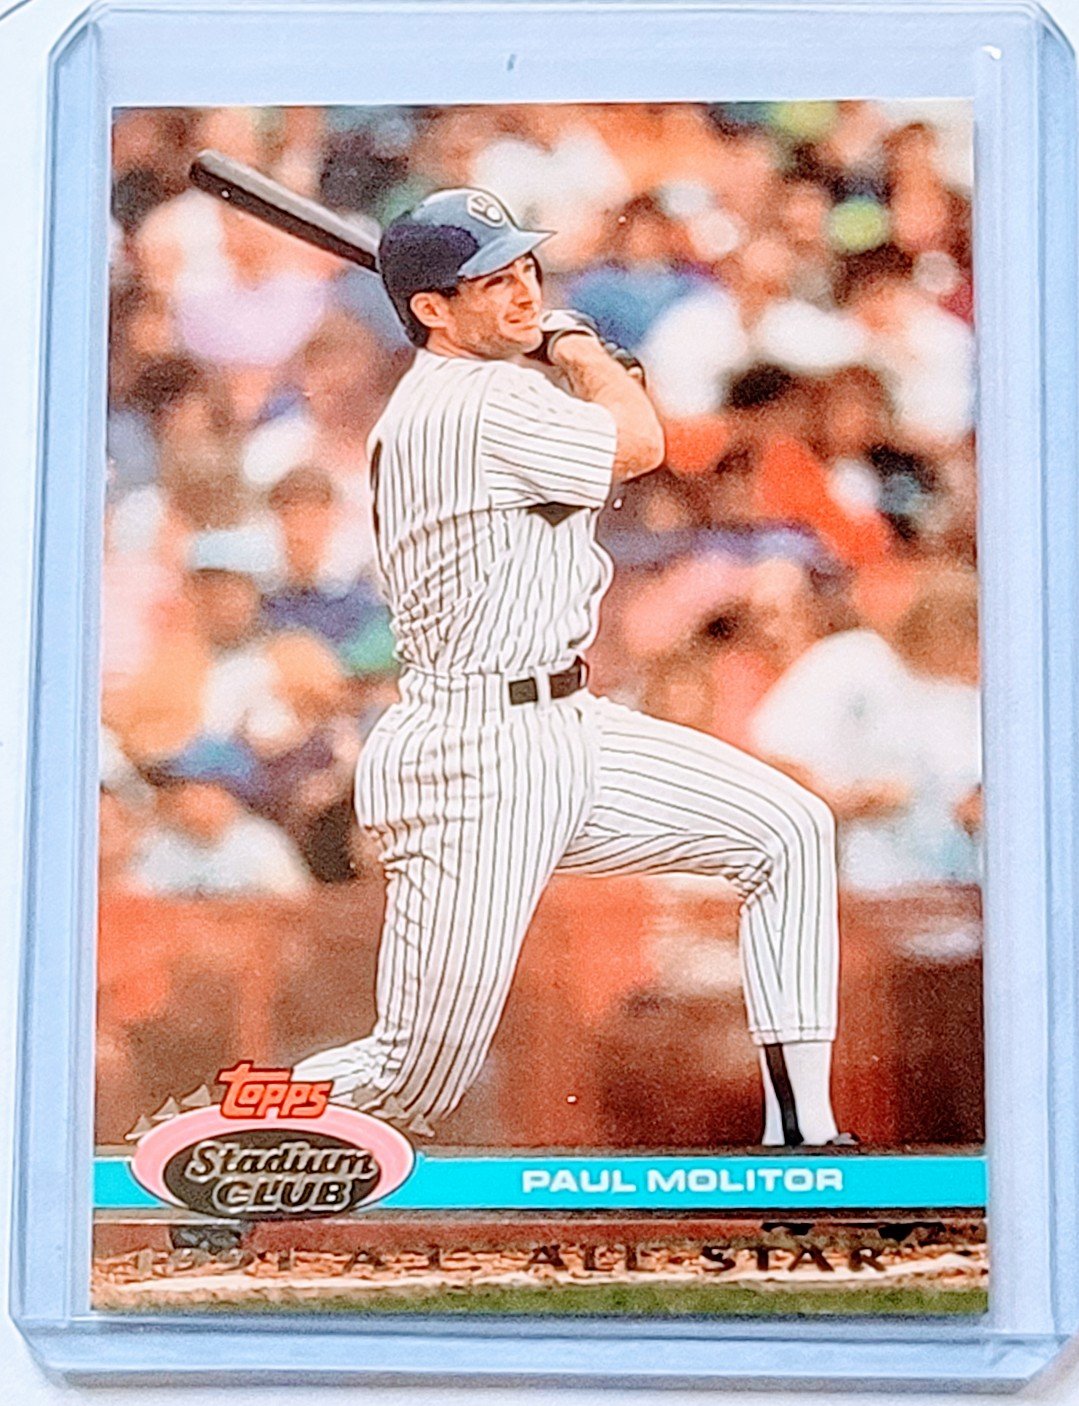 1992 Topps Stadium Club Dome Paul Molitor 1991 All Star MLB Baseball Trading Card TPTV simple Xclusive Collectibles   